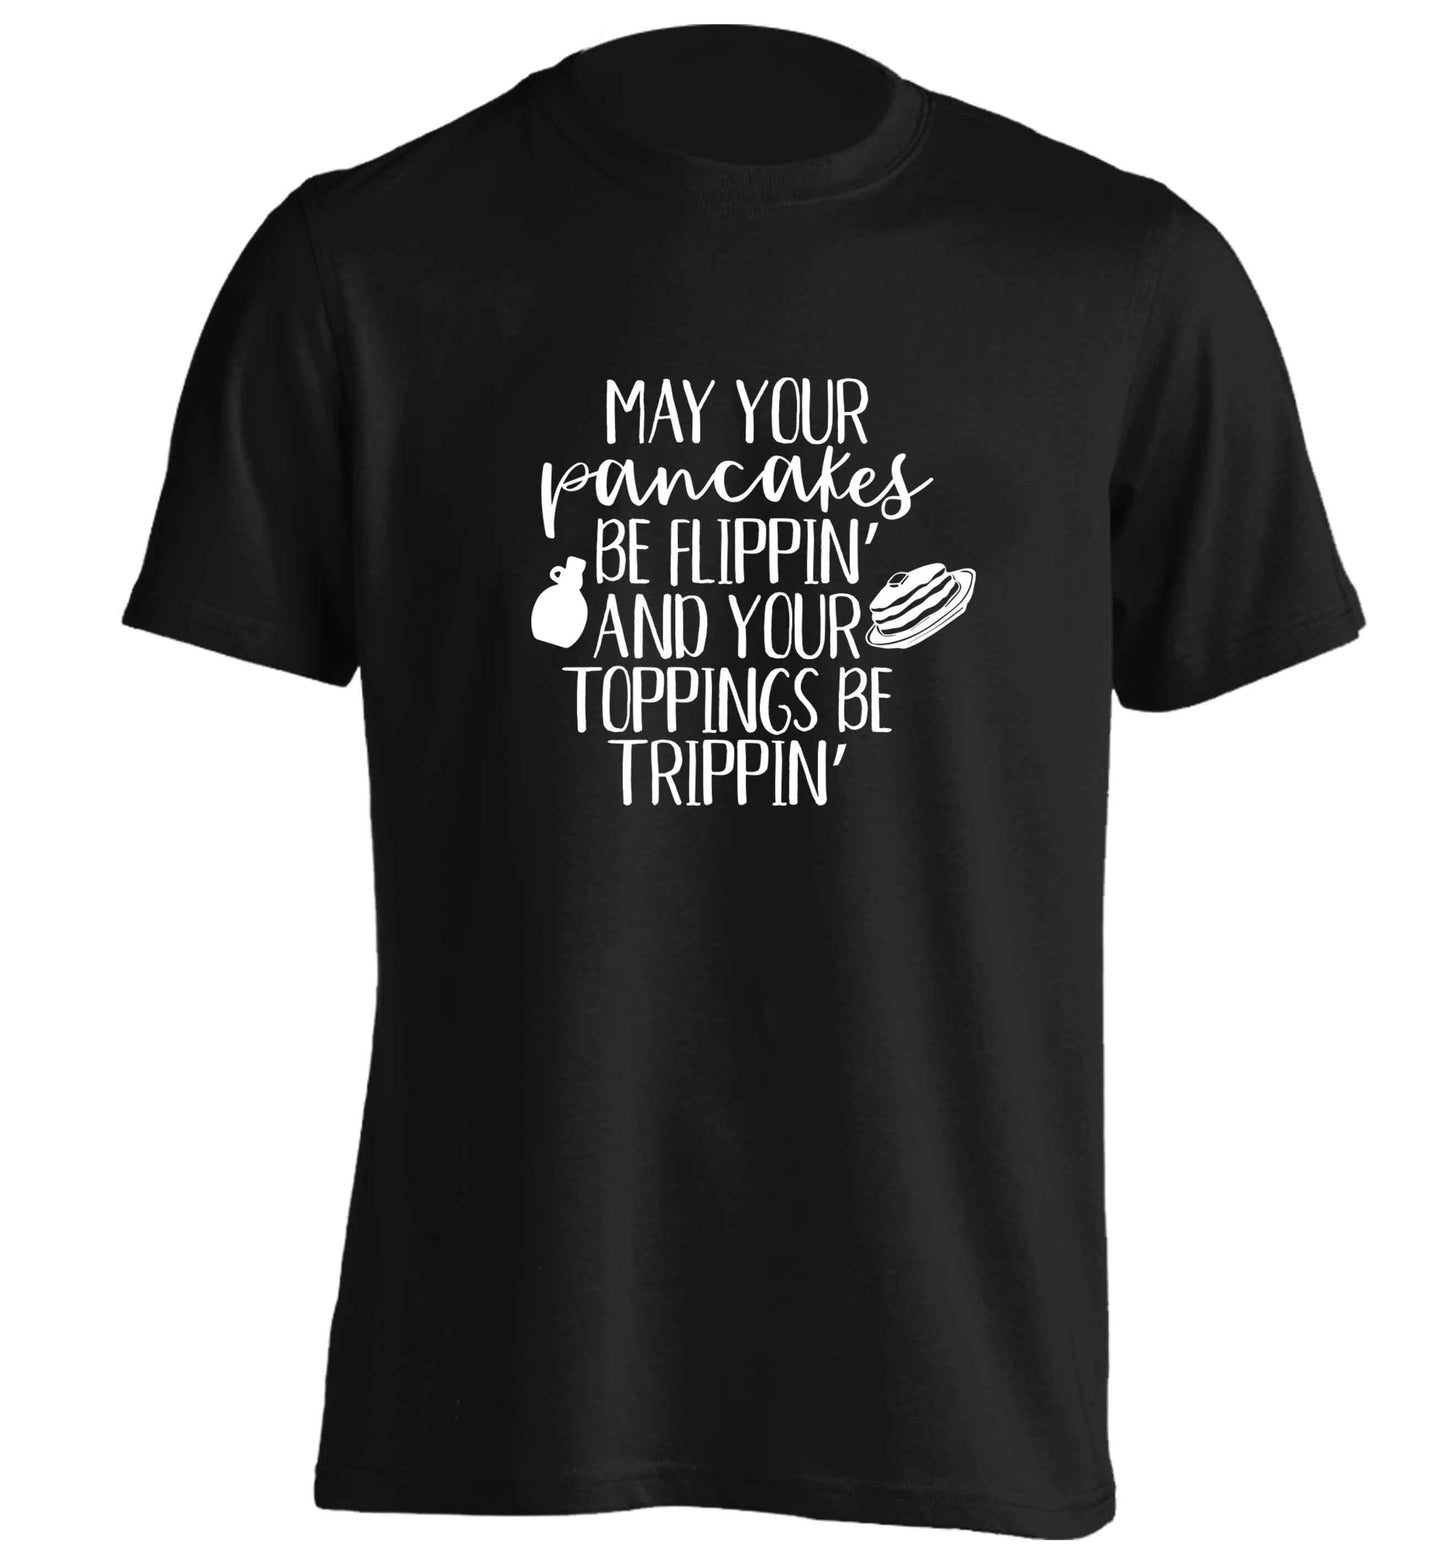 May your pancakes be flippin' and your toppings be trippin' adults unisex black Tshirt 2XL